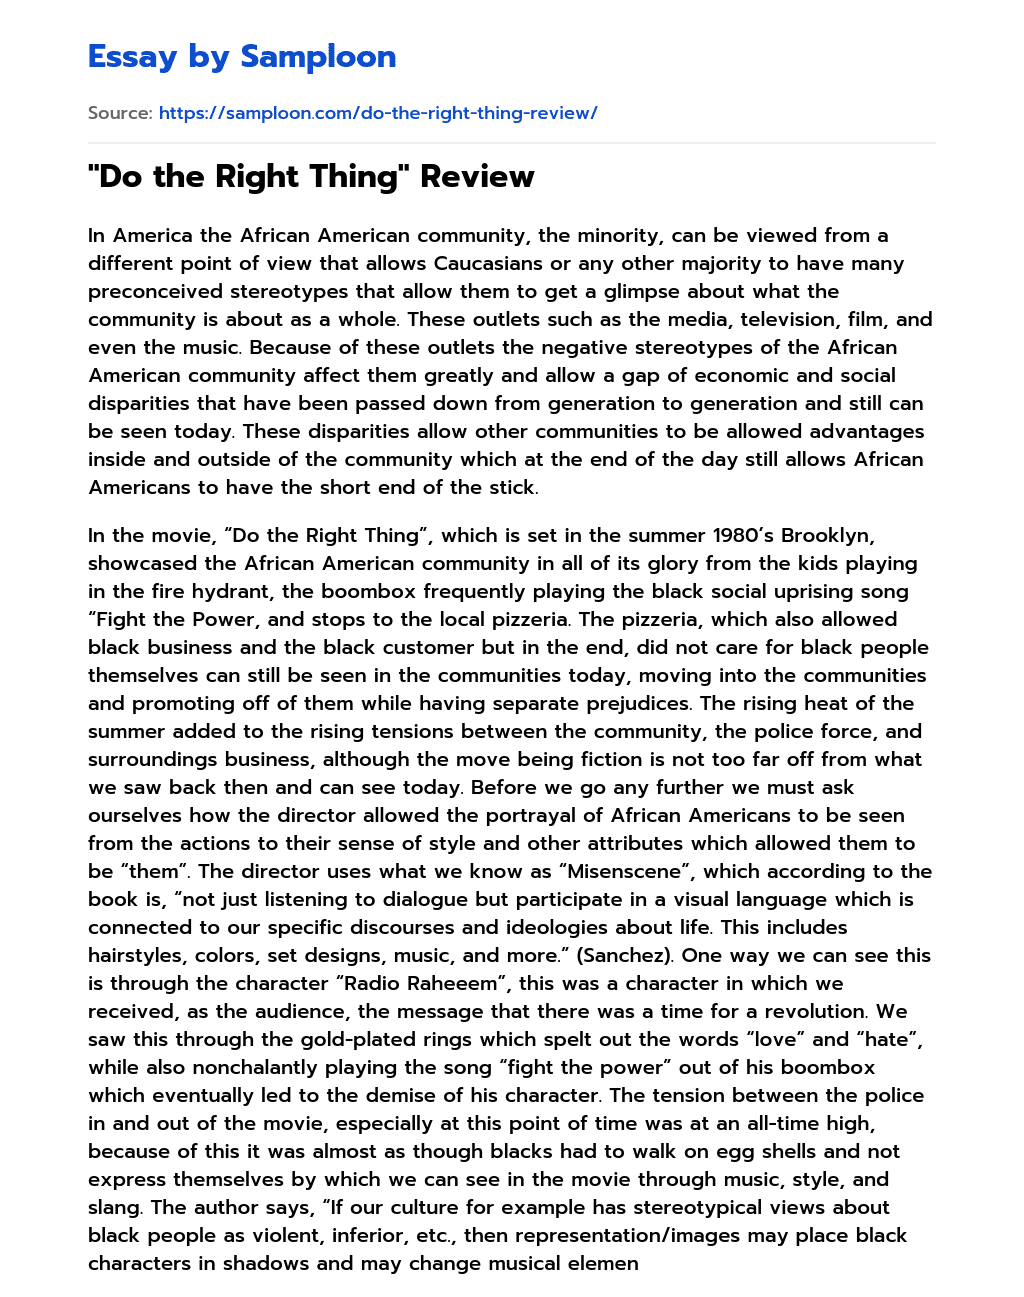 “Do the Right Thing” Review essay